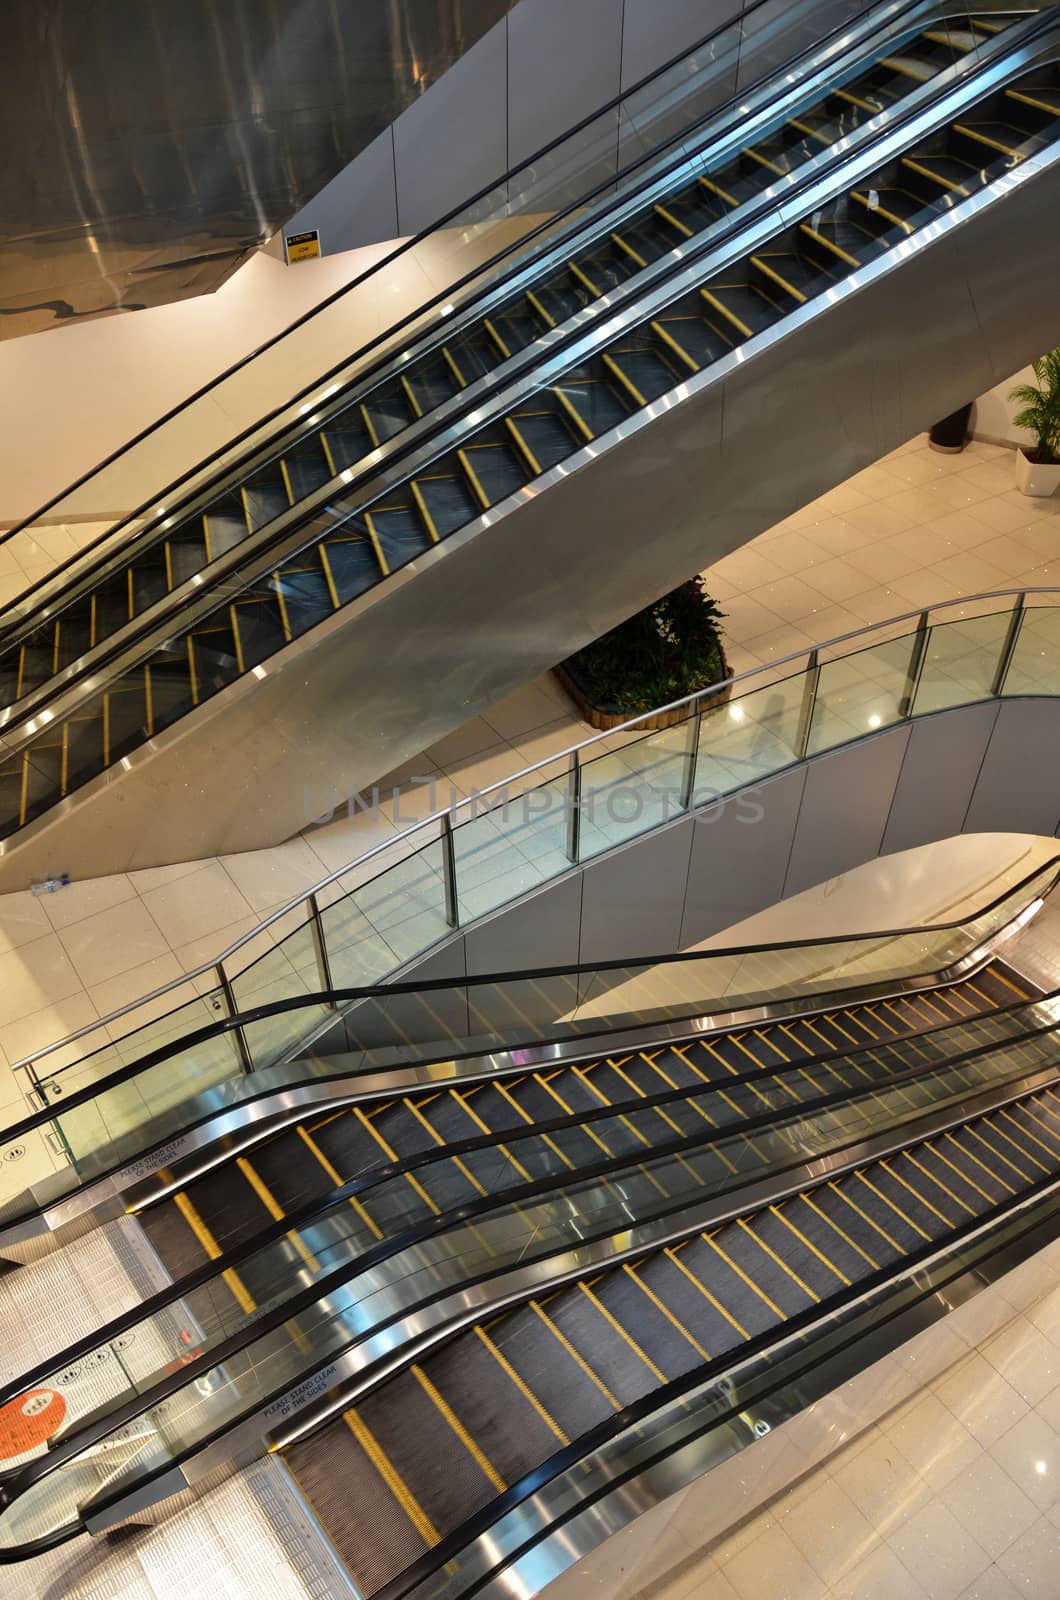 Looking down at multiple escalators in an office building or mall